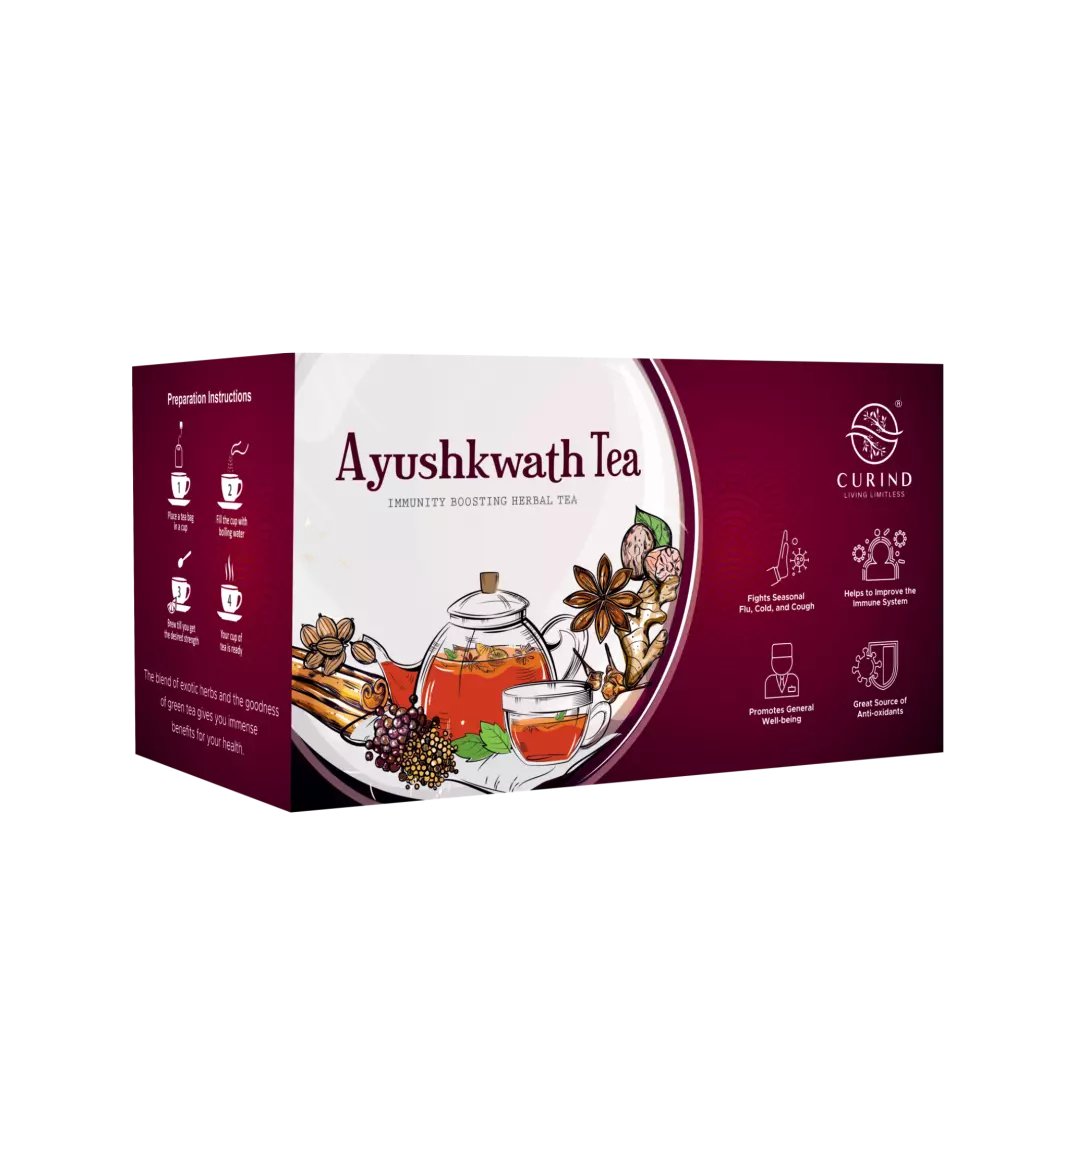 CURIND Ayush Kwath Tea- Packed with natural herbs to increase immunity